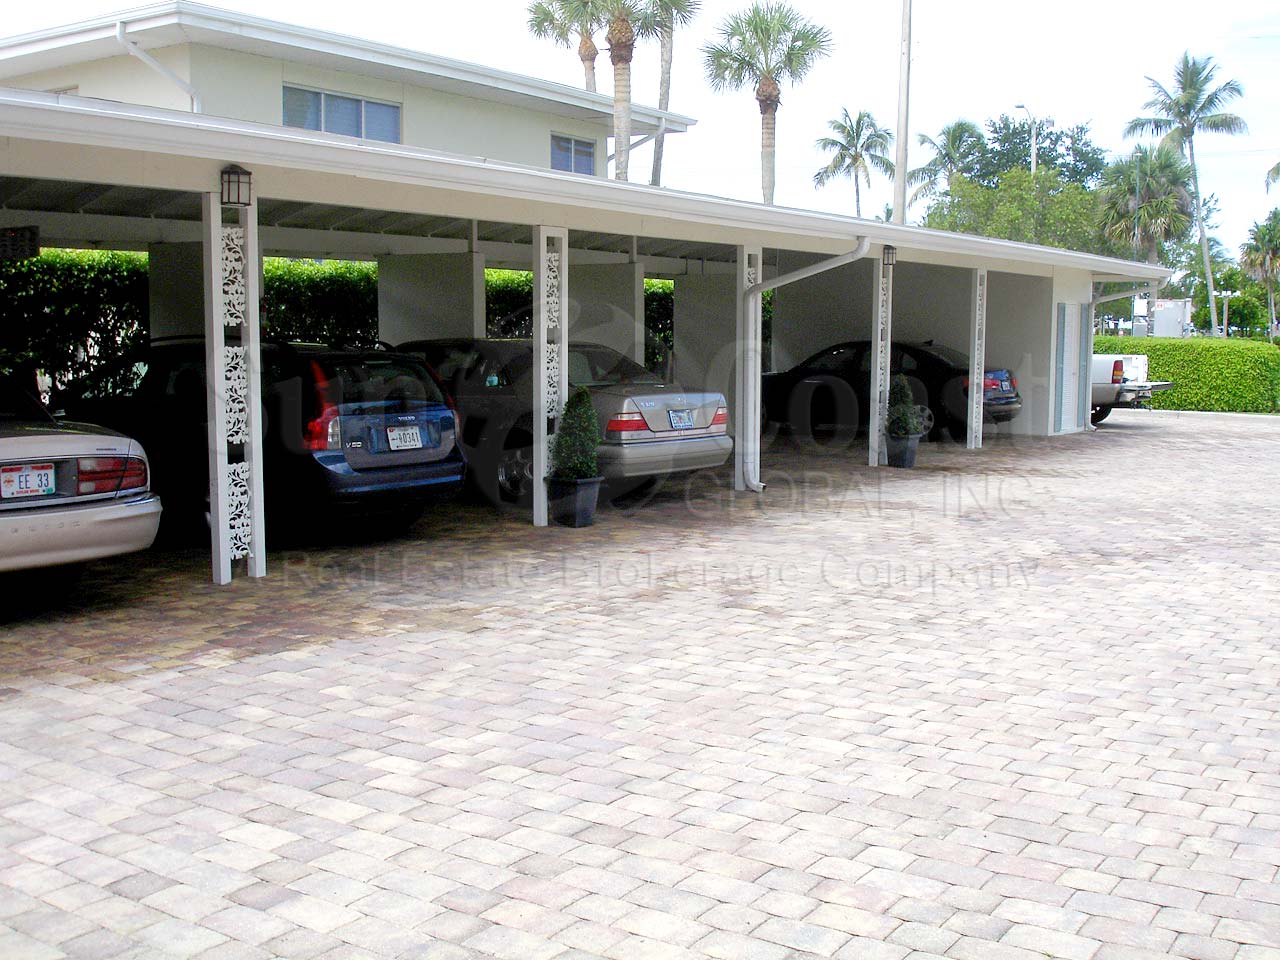 Reef Club Covered Parking